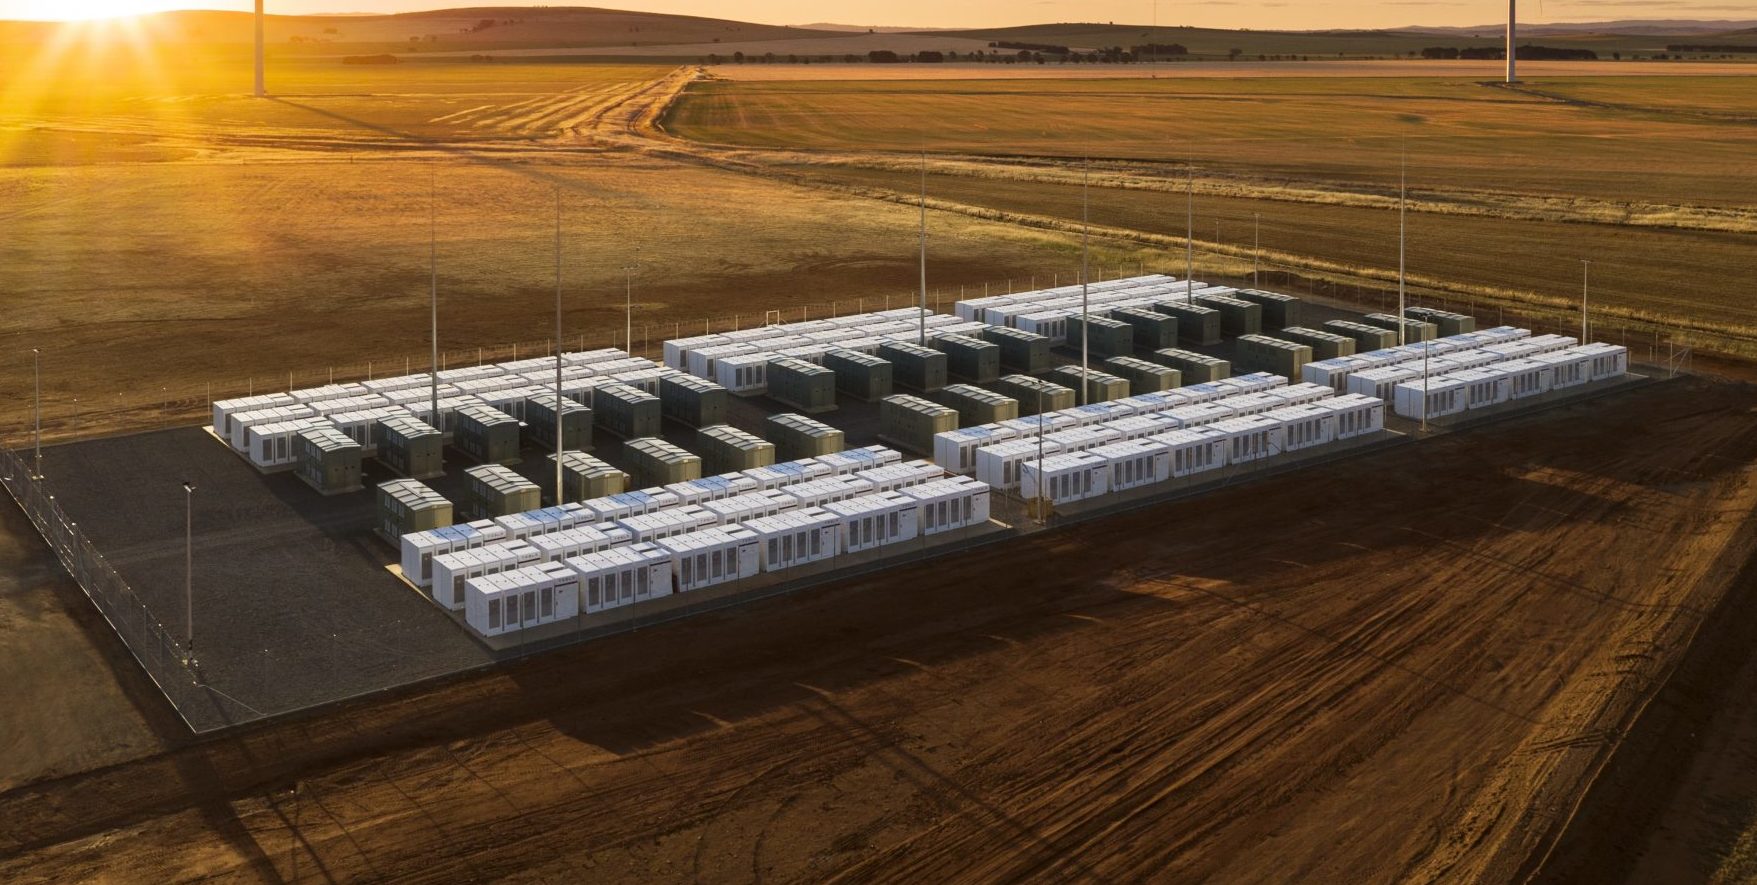 Tesla Powerpack Farm Inspires Creation of Two 250MW Giant Batteries In Australia